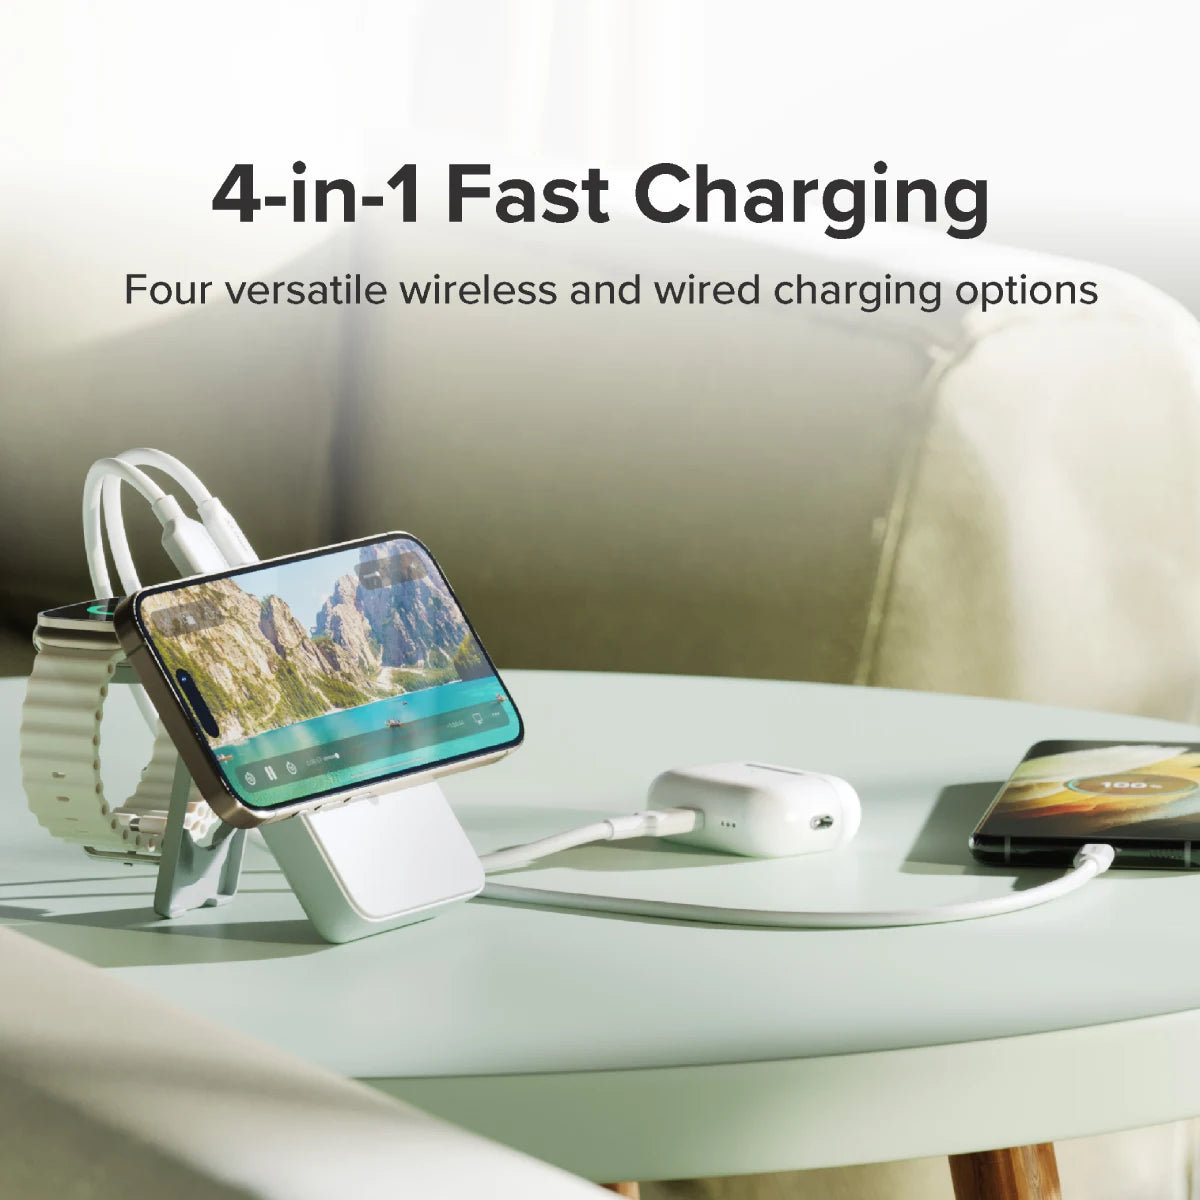 A large marketing image providing additional information about the product ALOGIC Lift 4-in-1 MagSafe Compatible Wireless Charging 10,000mAh Power Bank - Additional alt info not provided